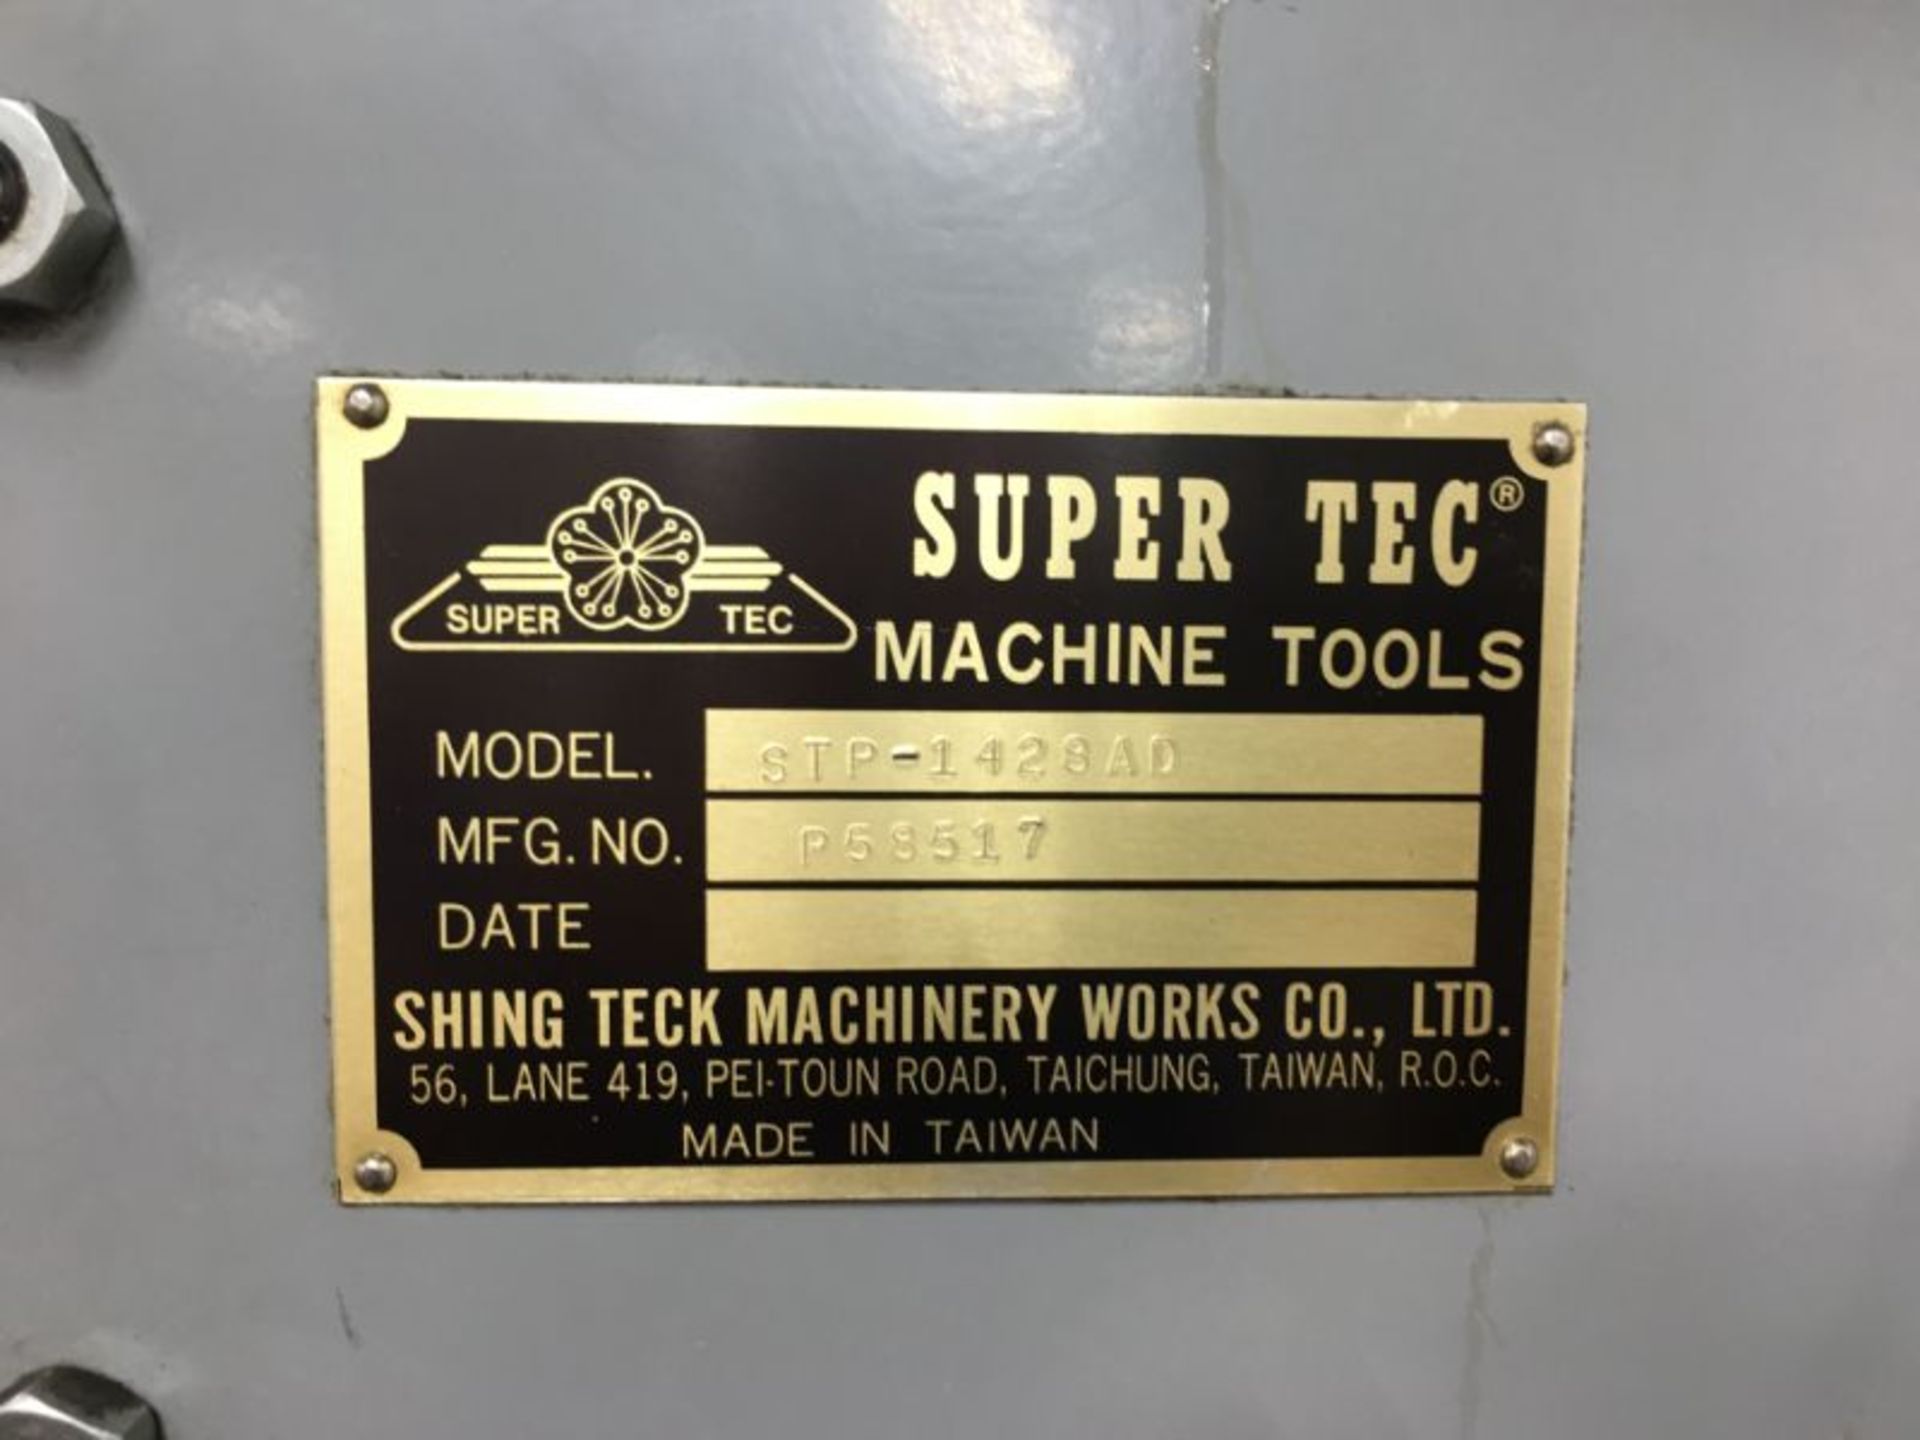 Supertec STP-1428AD 3-Axis Auto Hyd Surface Grinder, 14” x 28” - Image 6 of 6